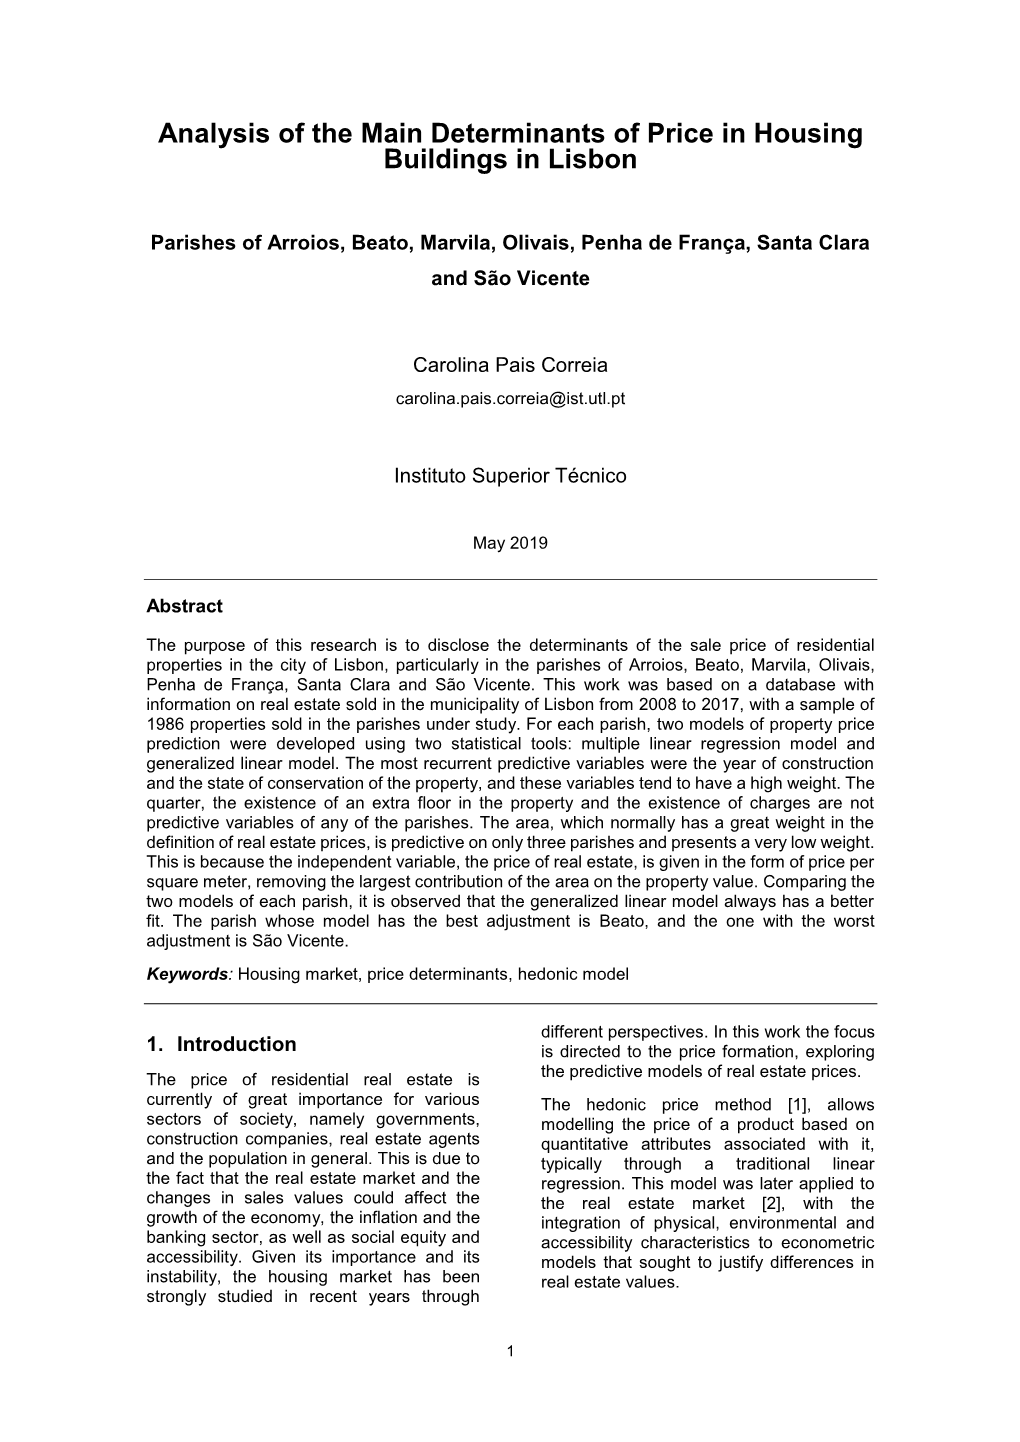 Analysis of the Main Determinants of Price in Housing Buildings in Lisbon